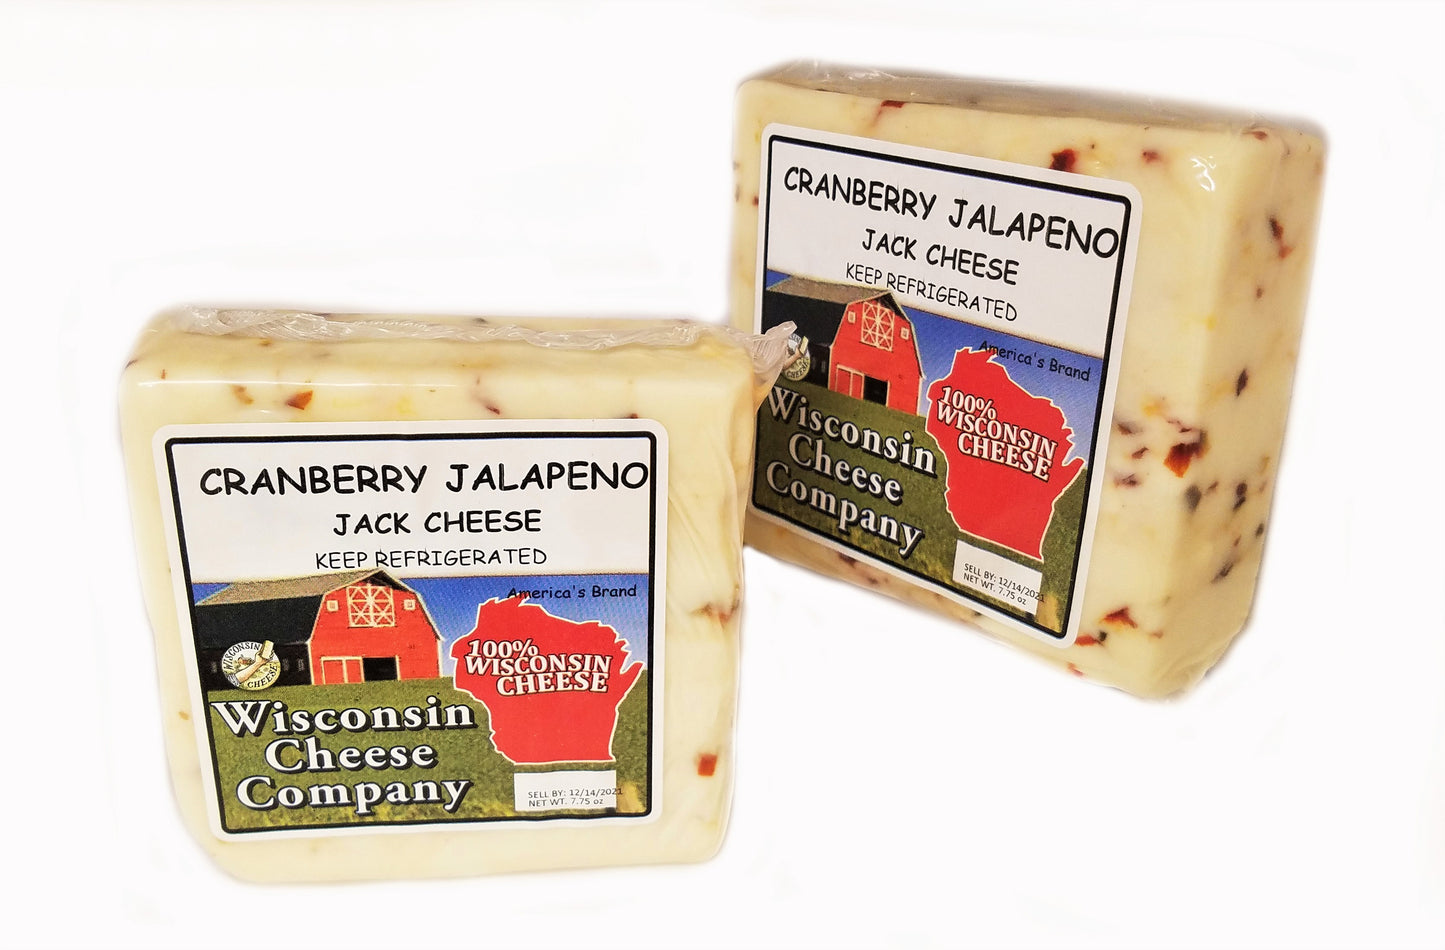 Two blocks of Cranberry Jalapeno Jack Cheese